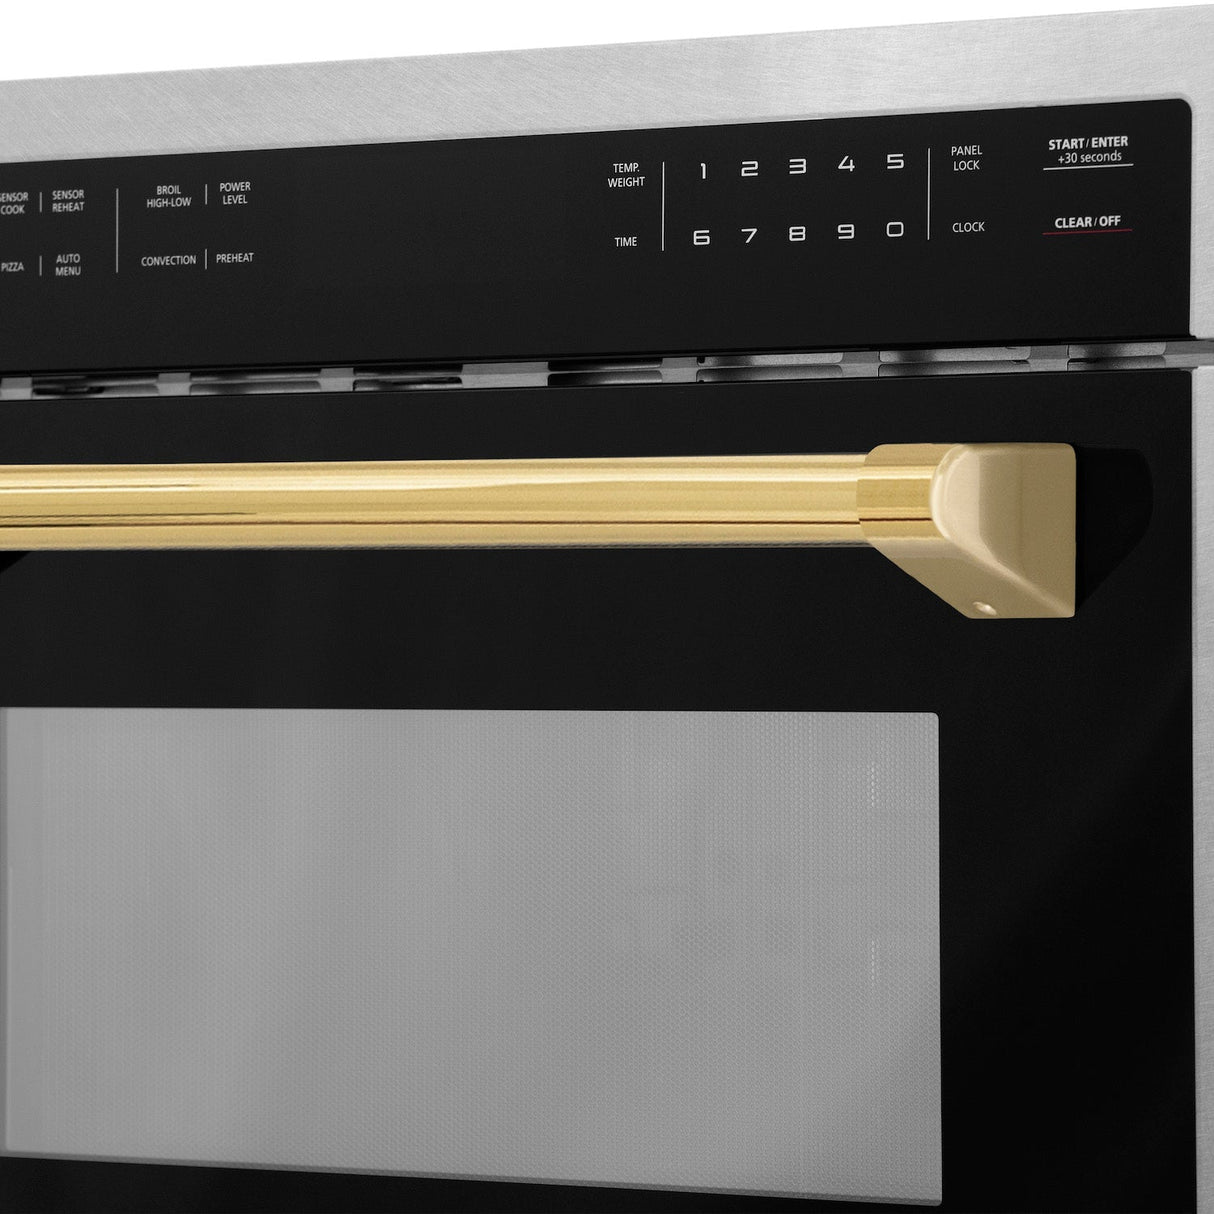 ZLINE Autograph Edition 24 in. 1.6 cu ft. Built-in Convection Microwave Oven in Fingerprint Resistant Stainless Steel with Polished Gold Accents (MWOZ-24-SS-G)